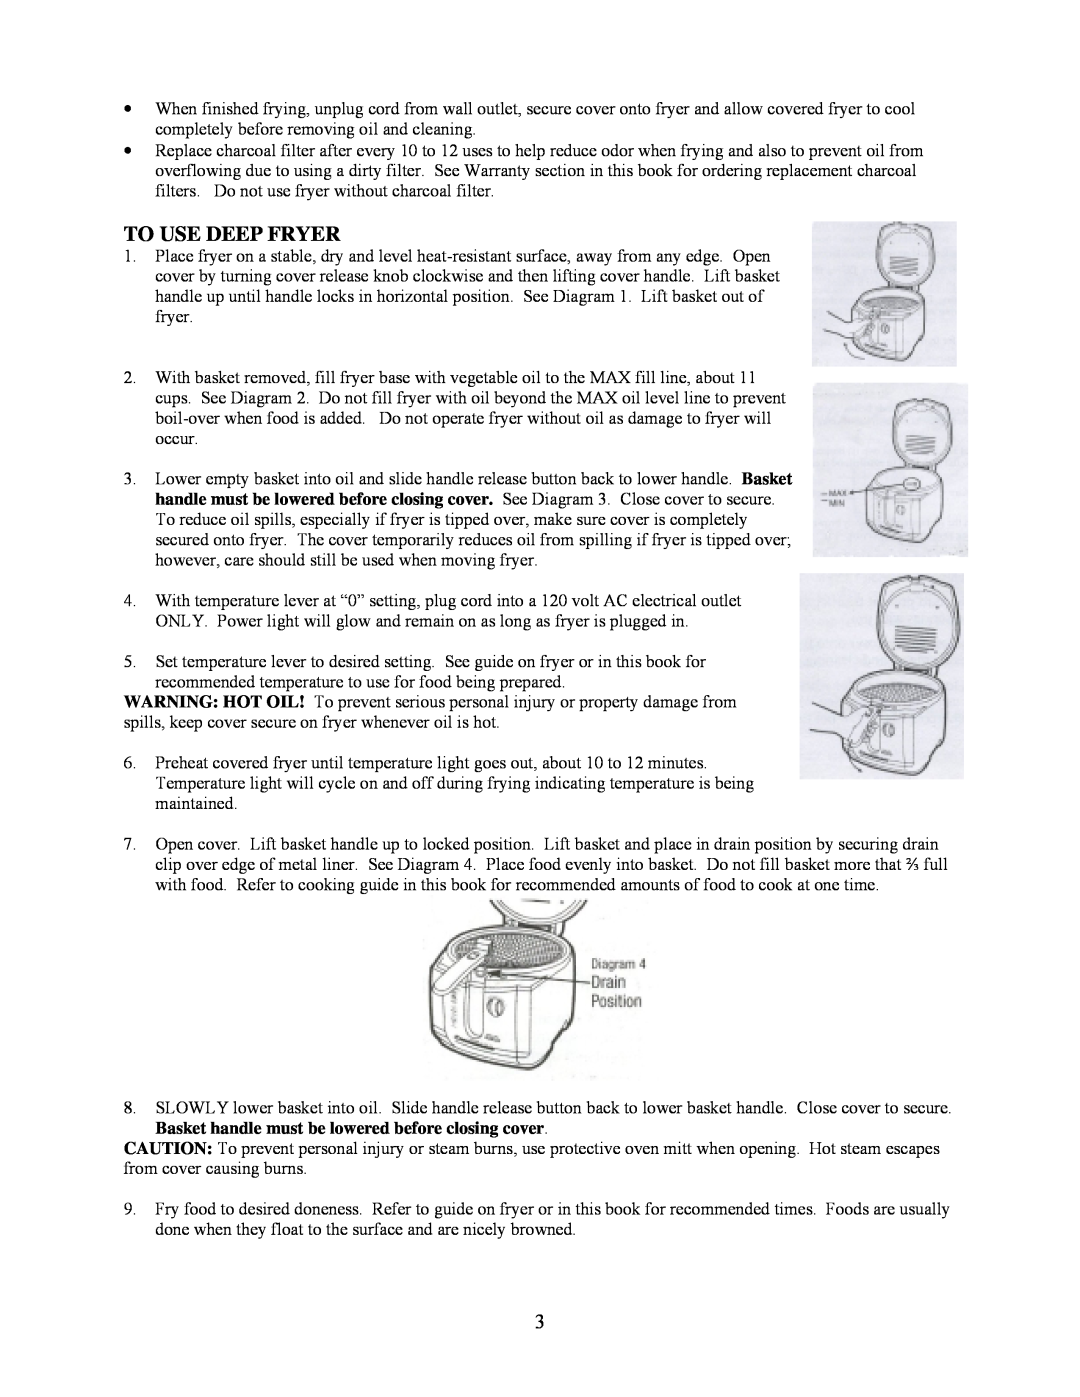 West Bend L 5179 instruction manual To Use Deep Fryer 